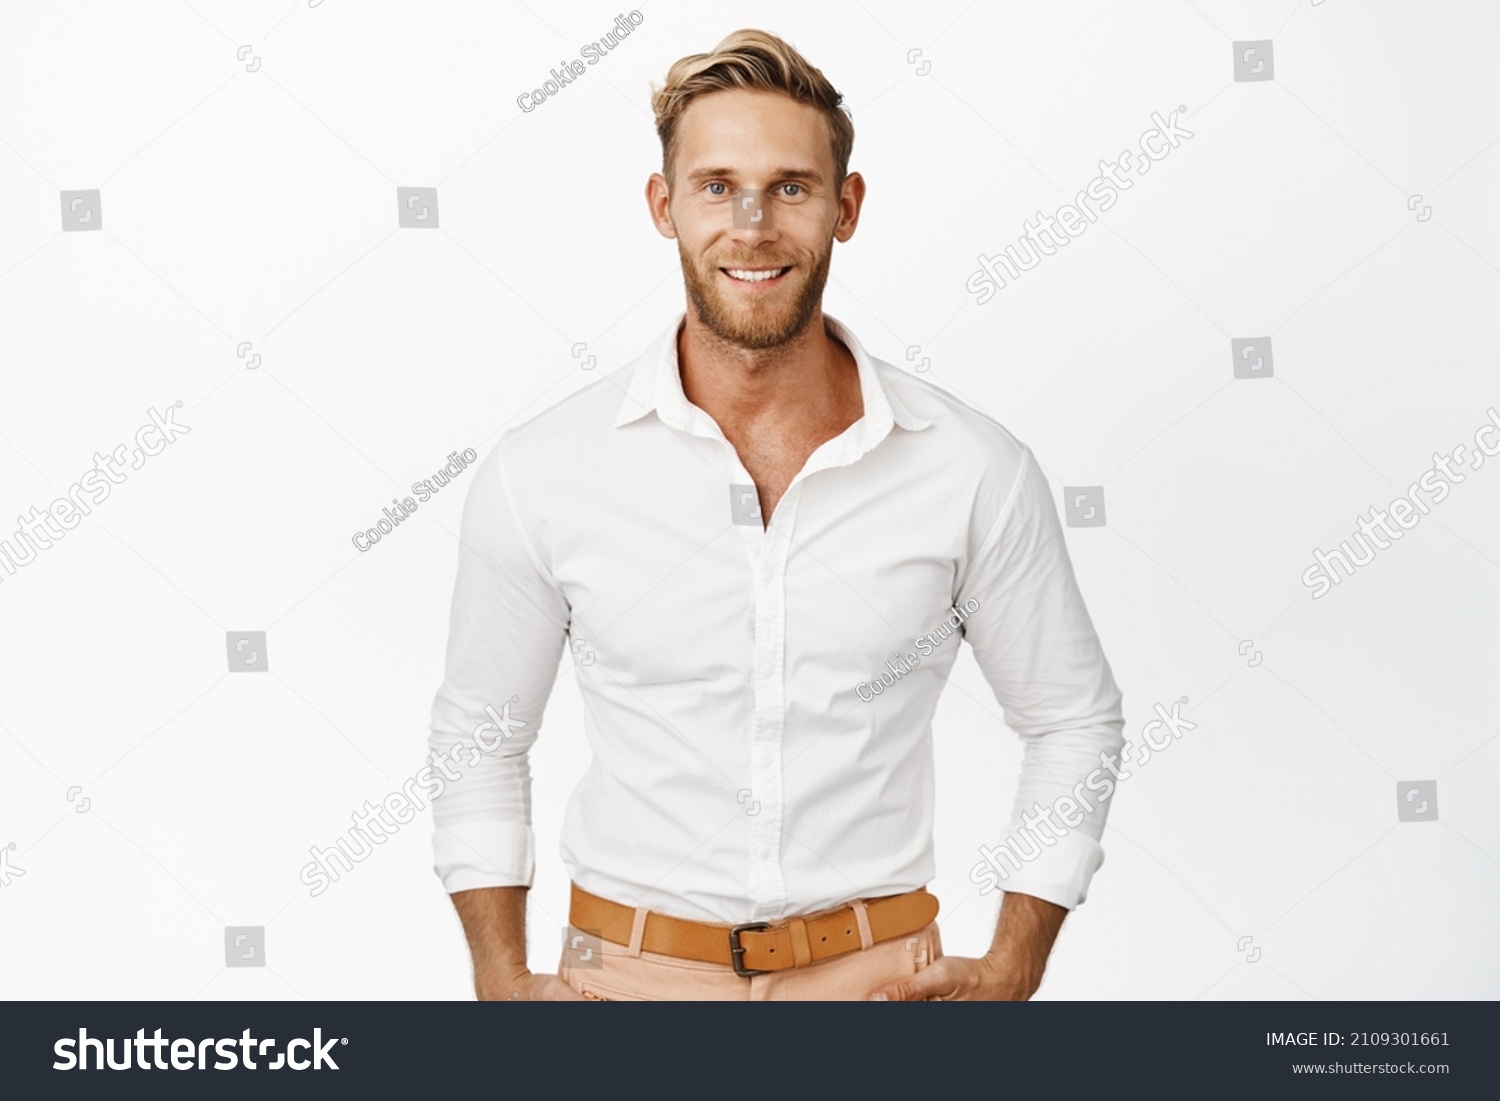 British man with blond hair and beard - wide 10